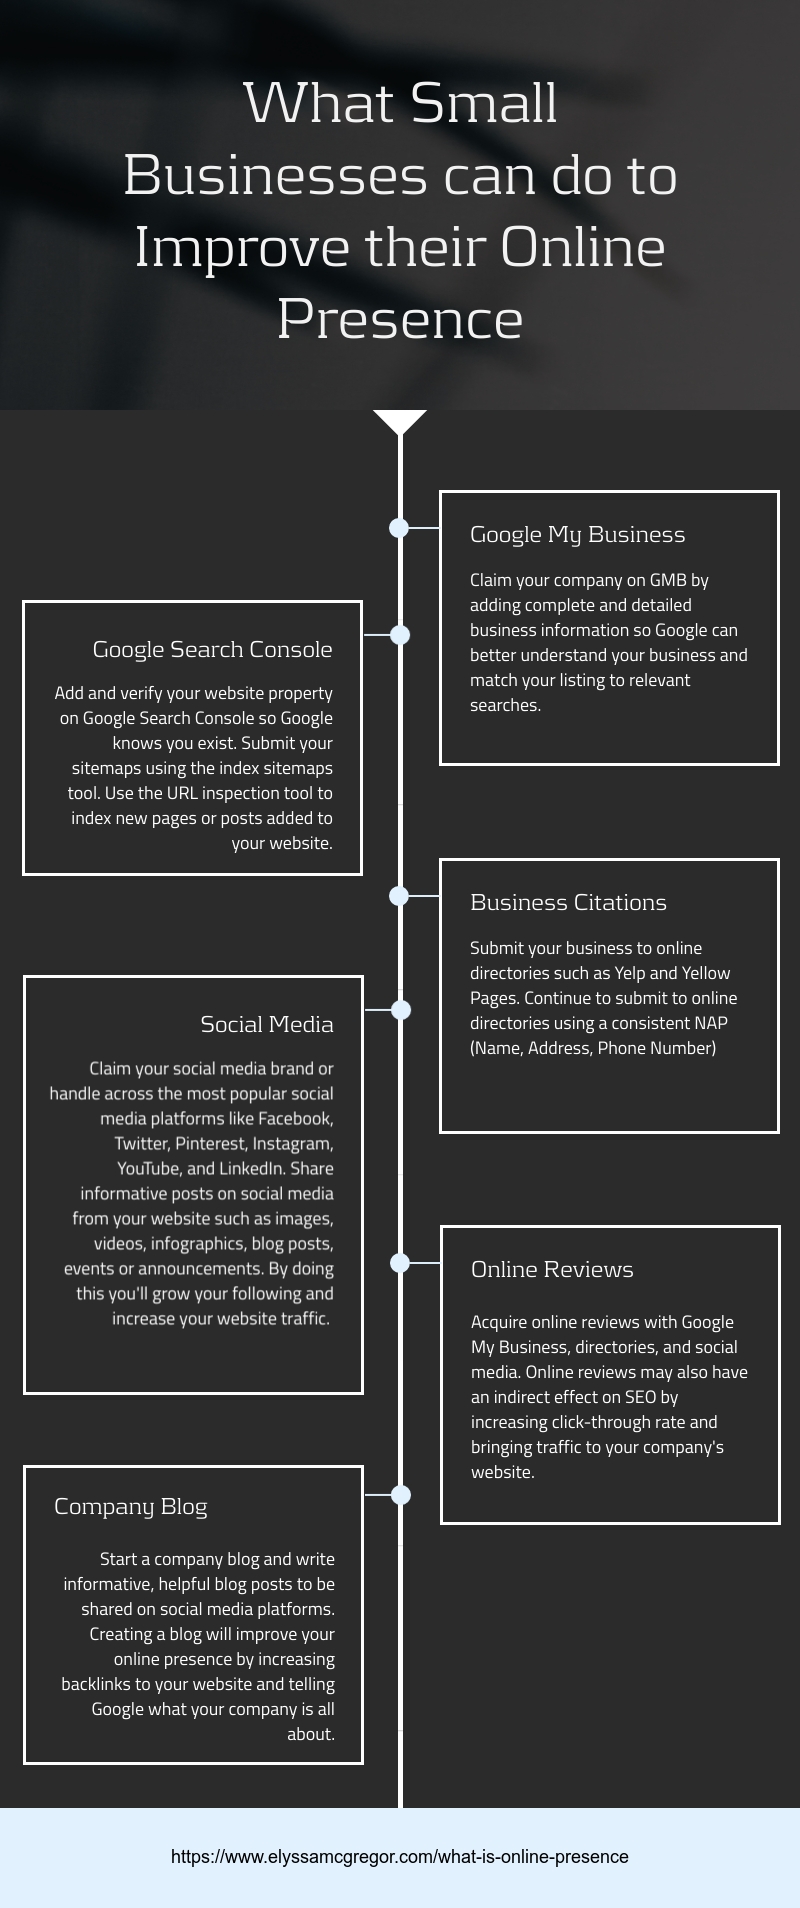 What small businesses can do to improve their online presence infographic